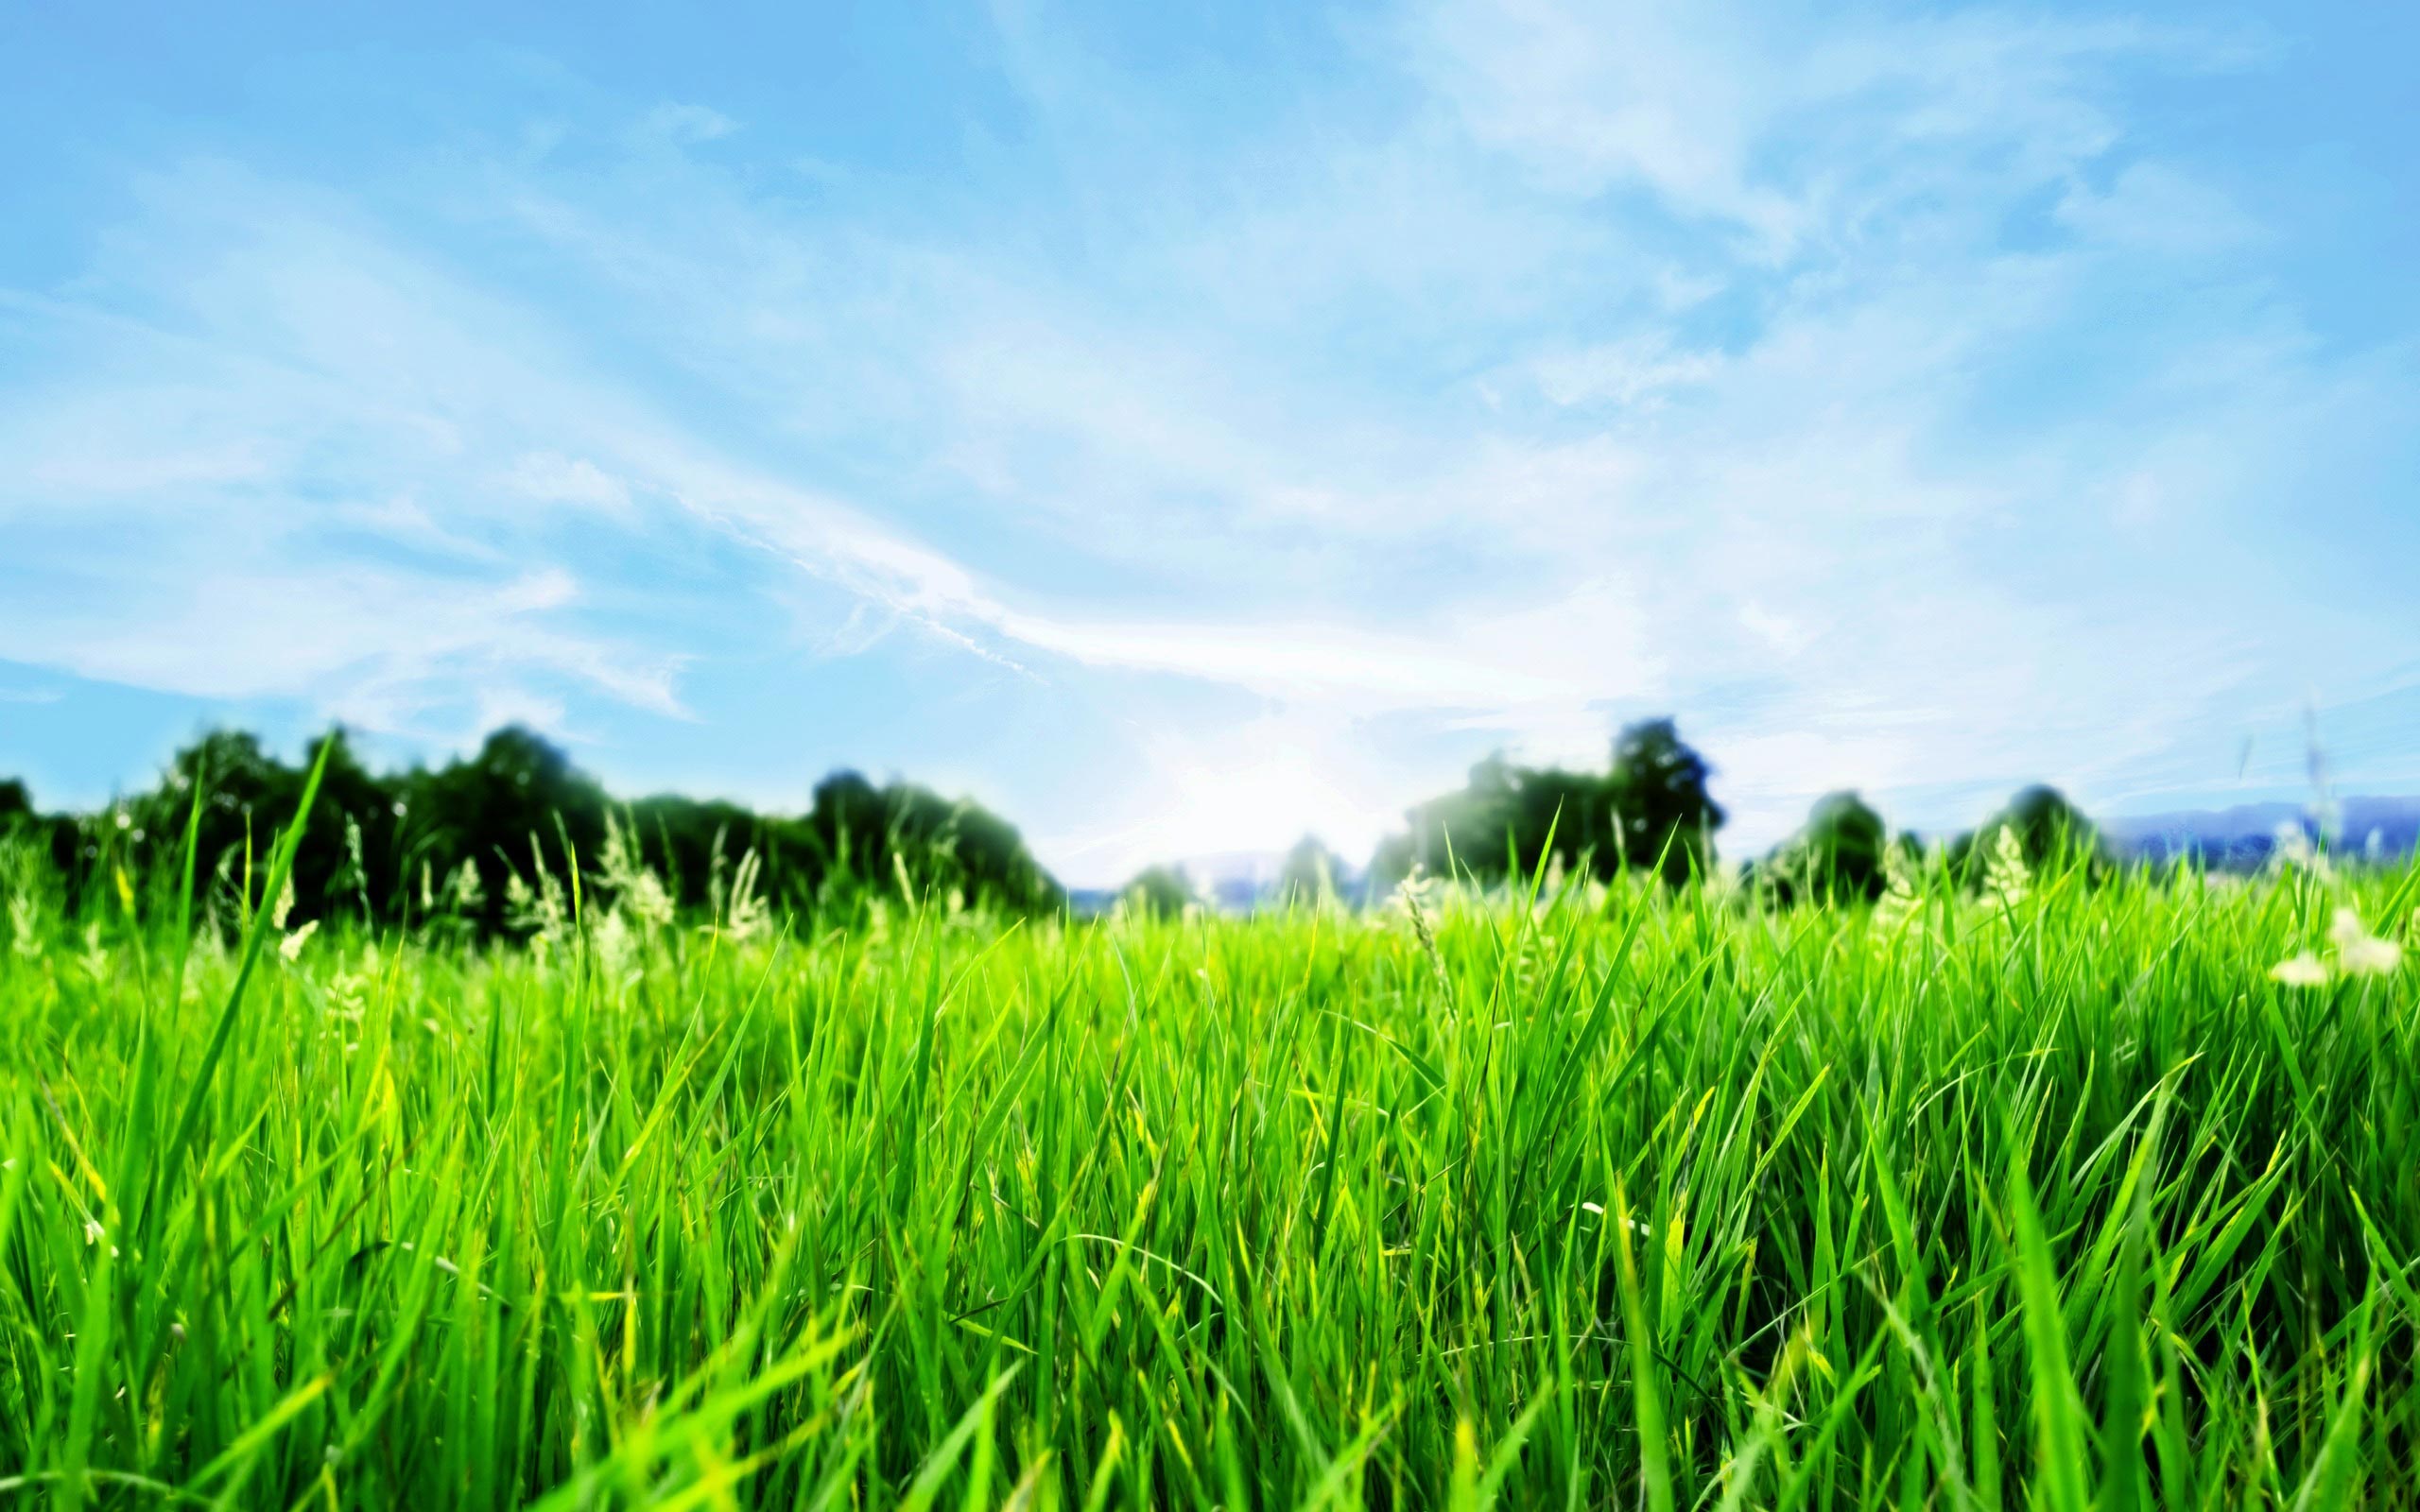 Collection of Grass And Sky Wallpaper on HDWallpapers